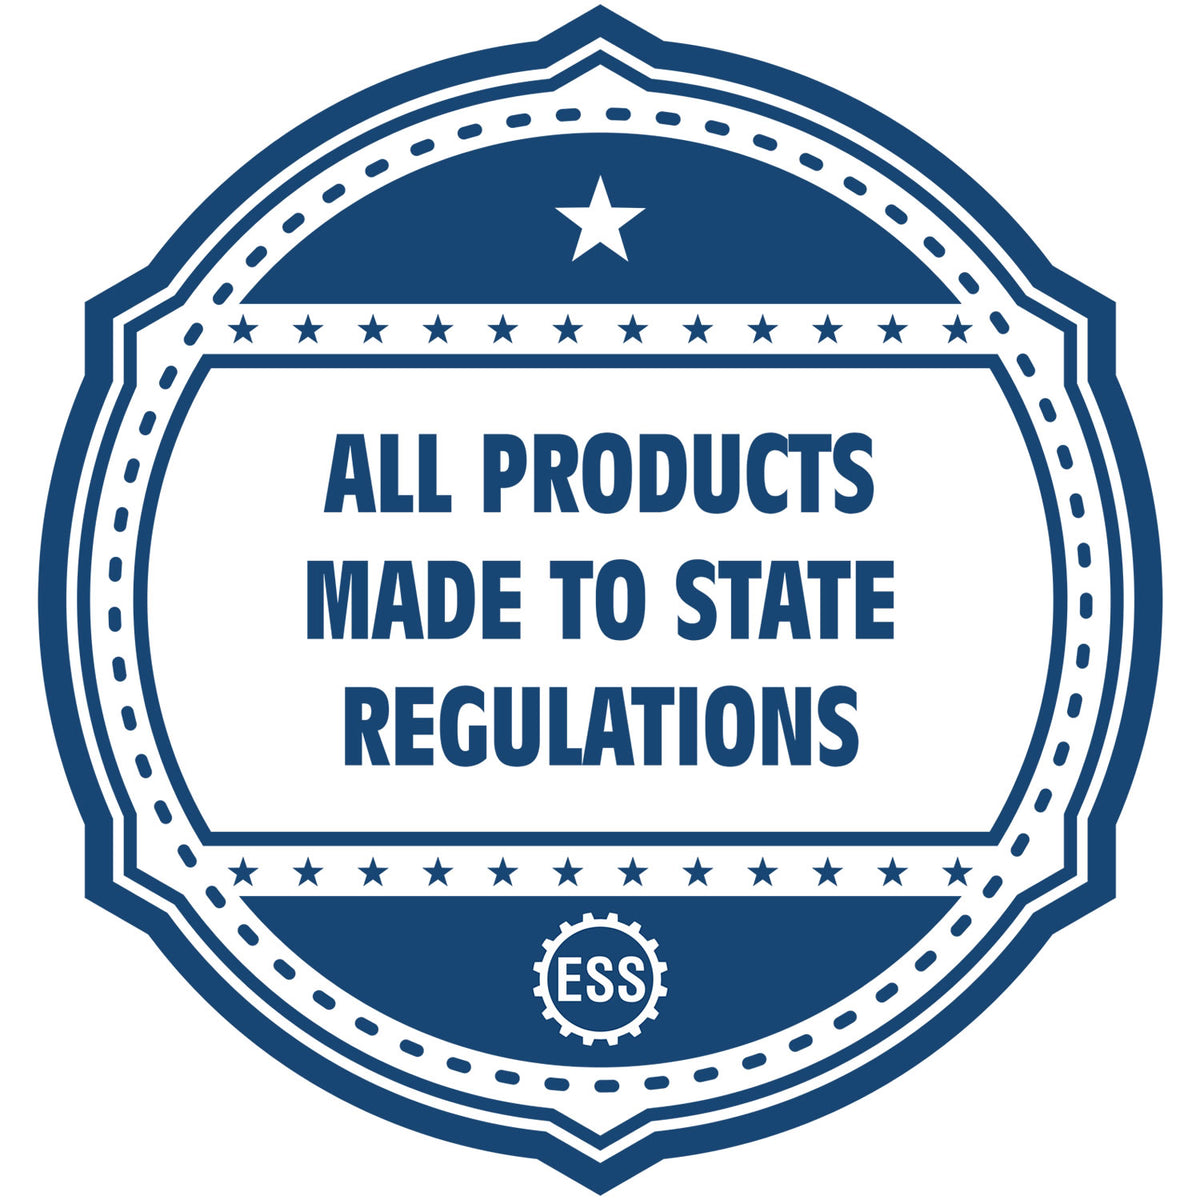 An icon or badge element for the Soft Louisiana Professional Engineer Seal showing that this product is made in compliance with state regulations.